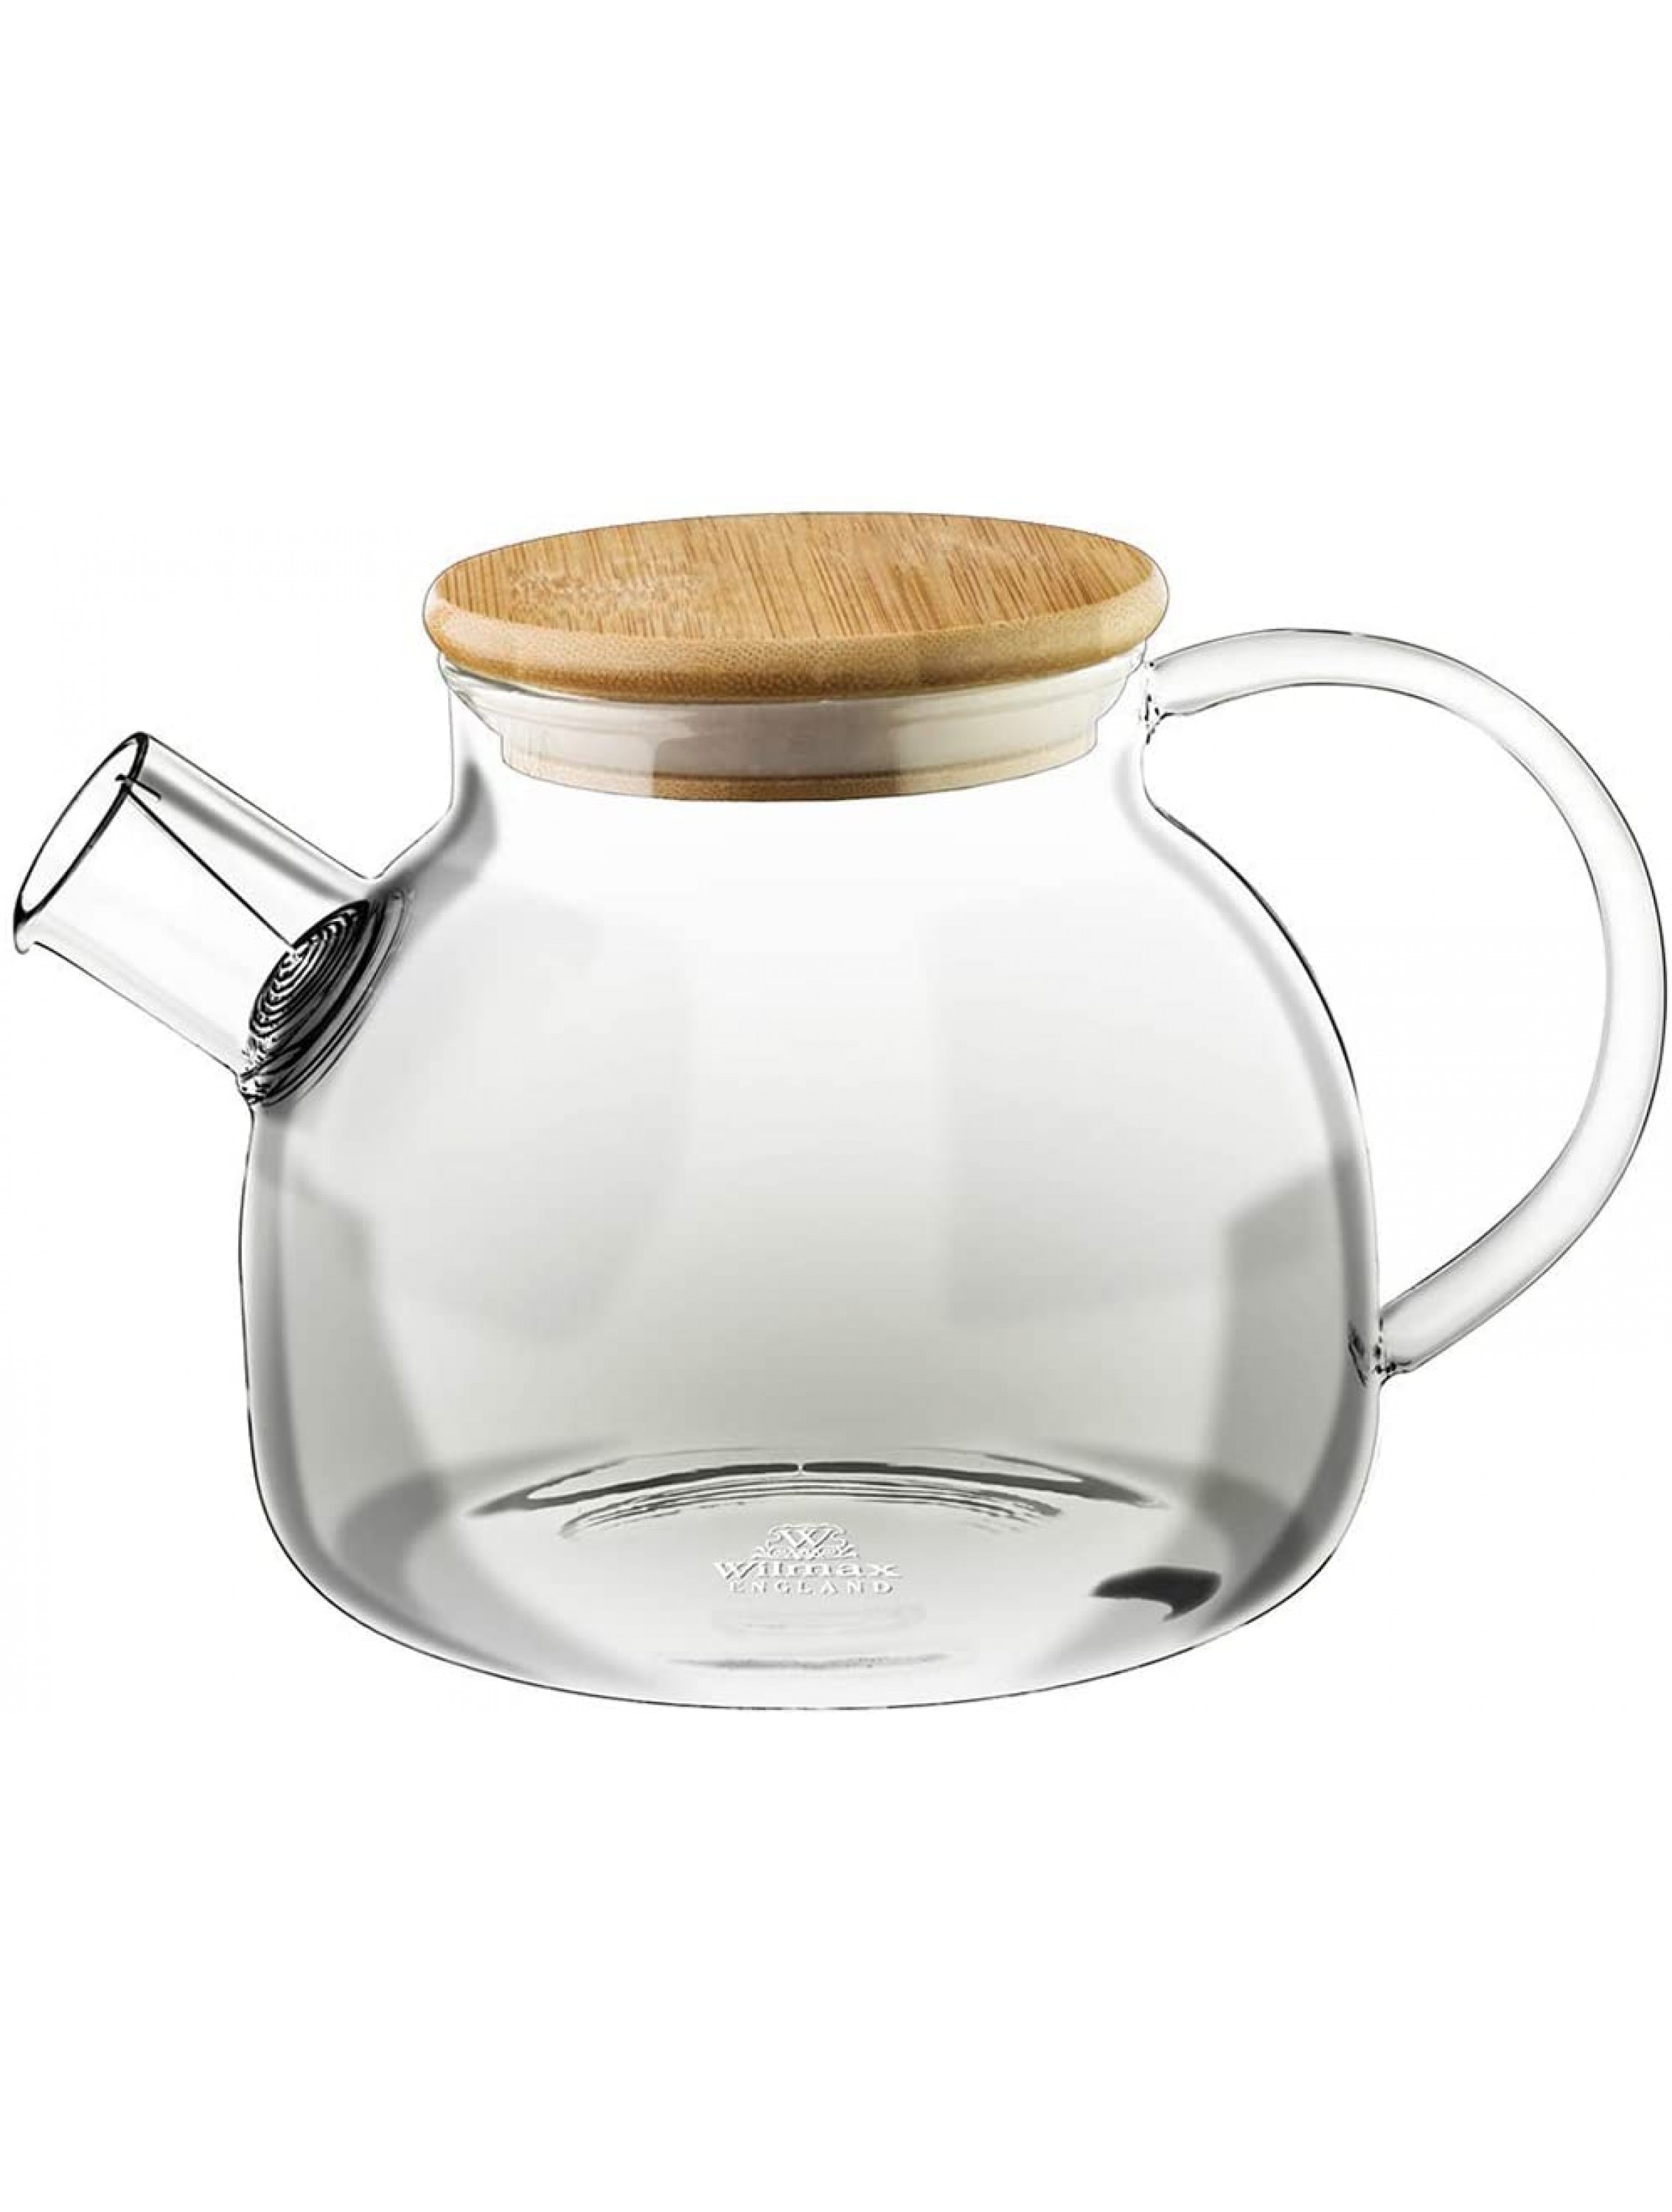 Wilmax Thermo Glass Tea Pot With Bamboo Lid And Removable stainless steel Spring Infuser 32 Fl Oz|Open Stove Safe - BZ2P6SKCC